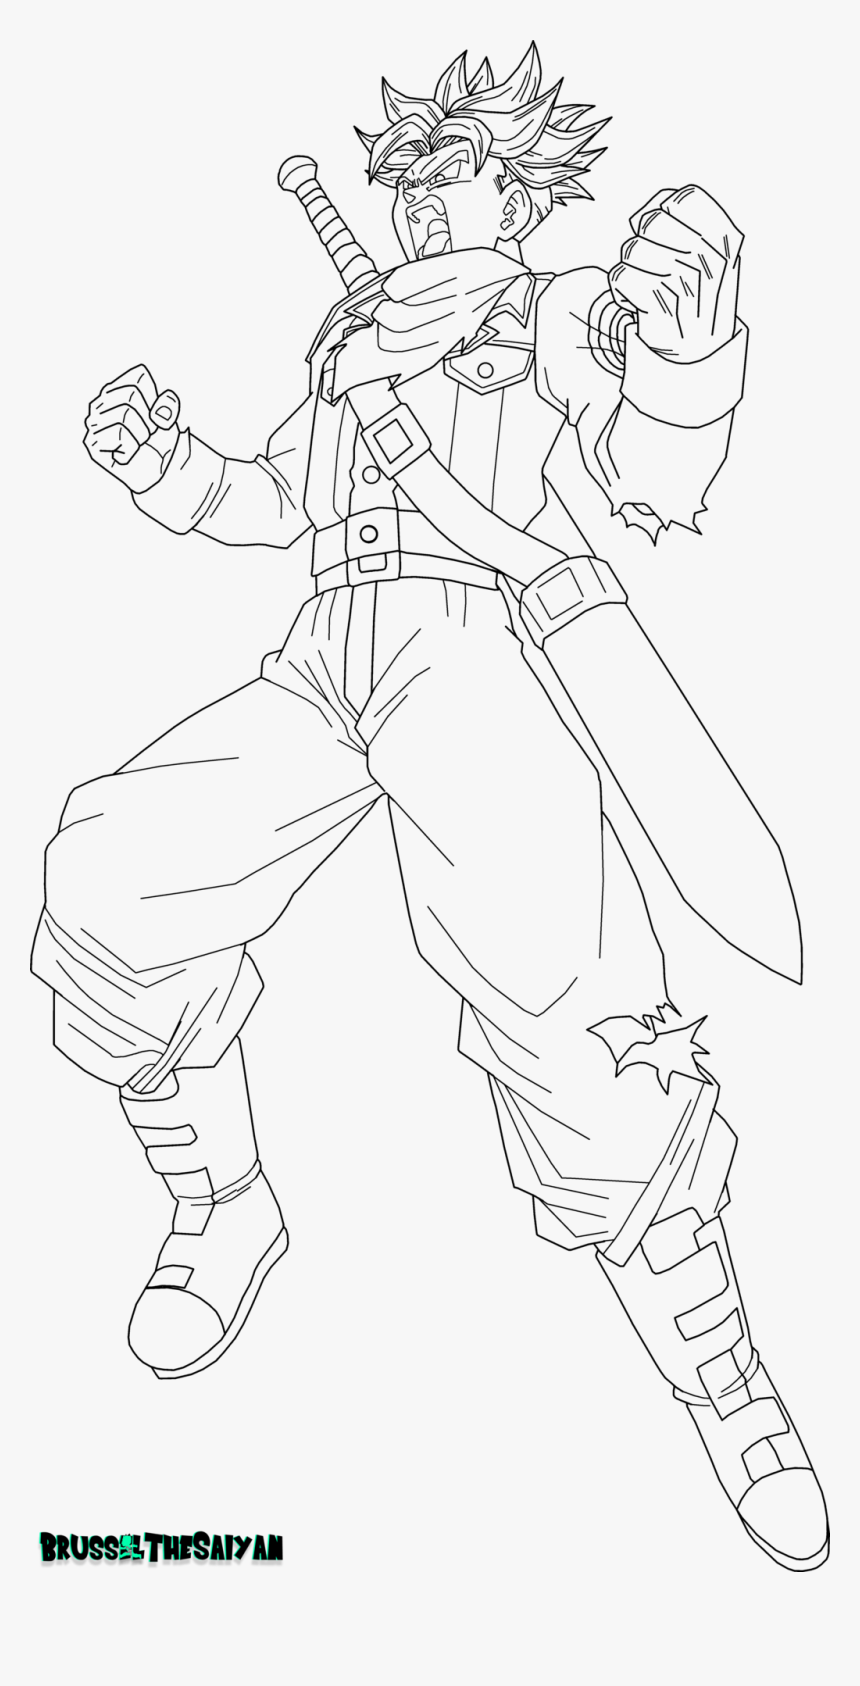 Future Drawing Cleanliness - Future Trunks Super Saiyan Drawing, HD Png Download, Free Download